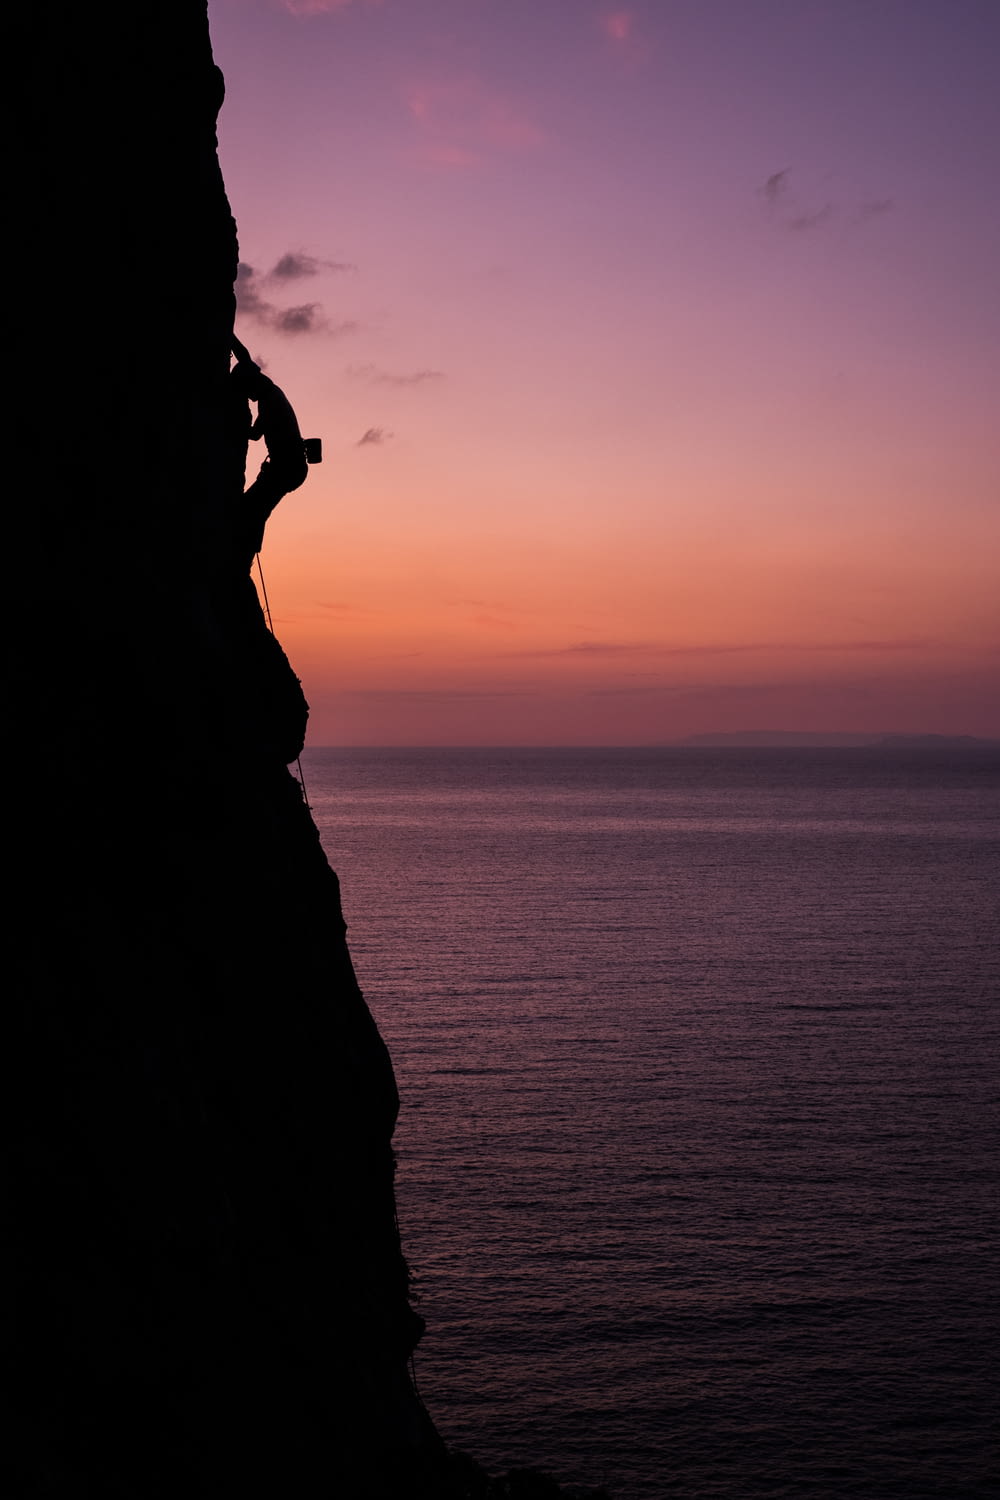 a person climbing up the side of a cliff